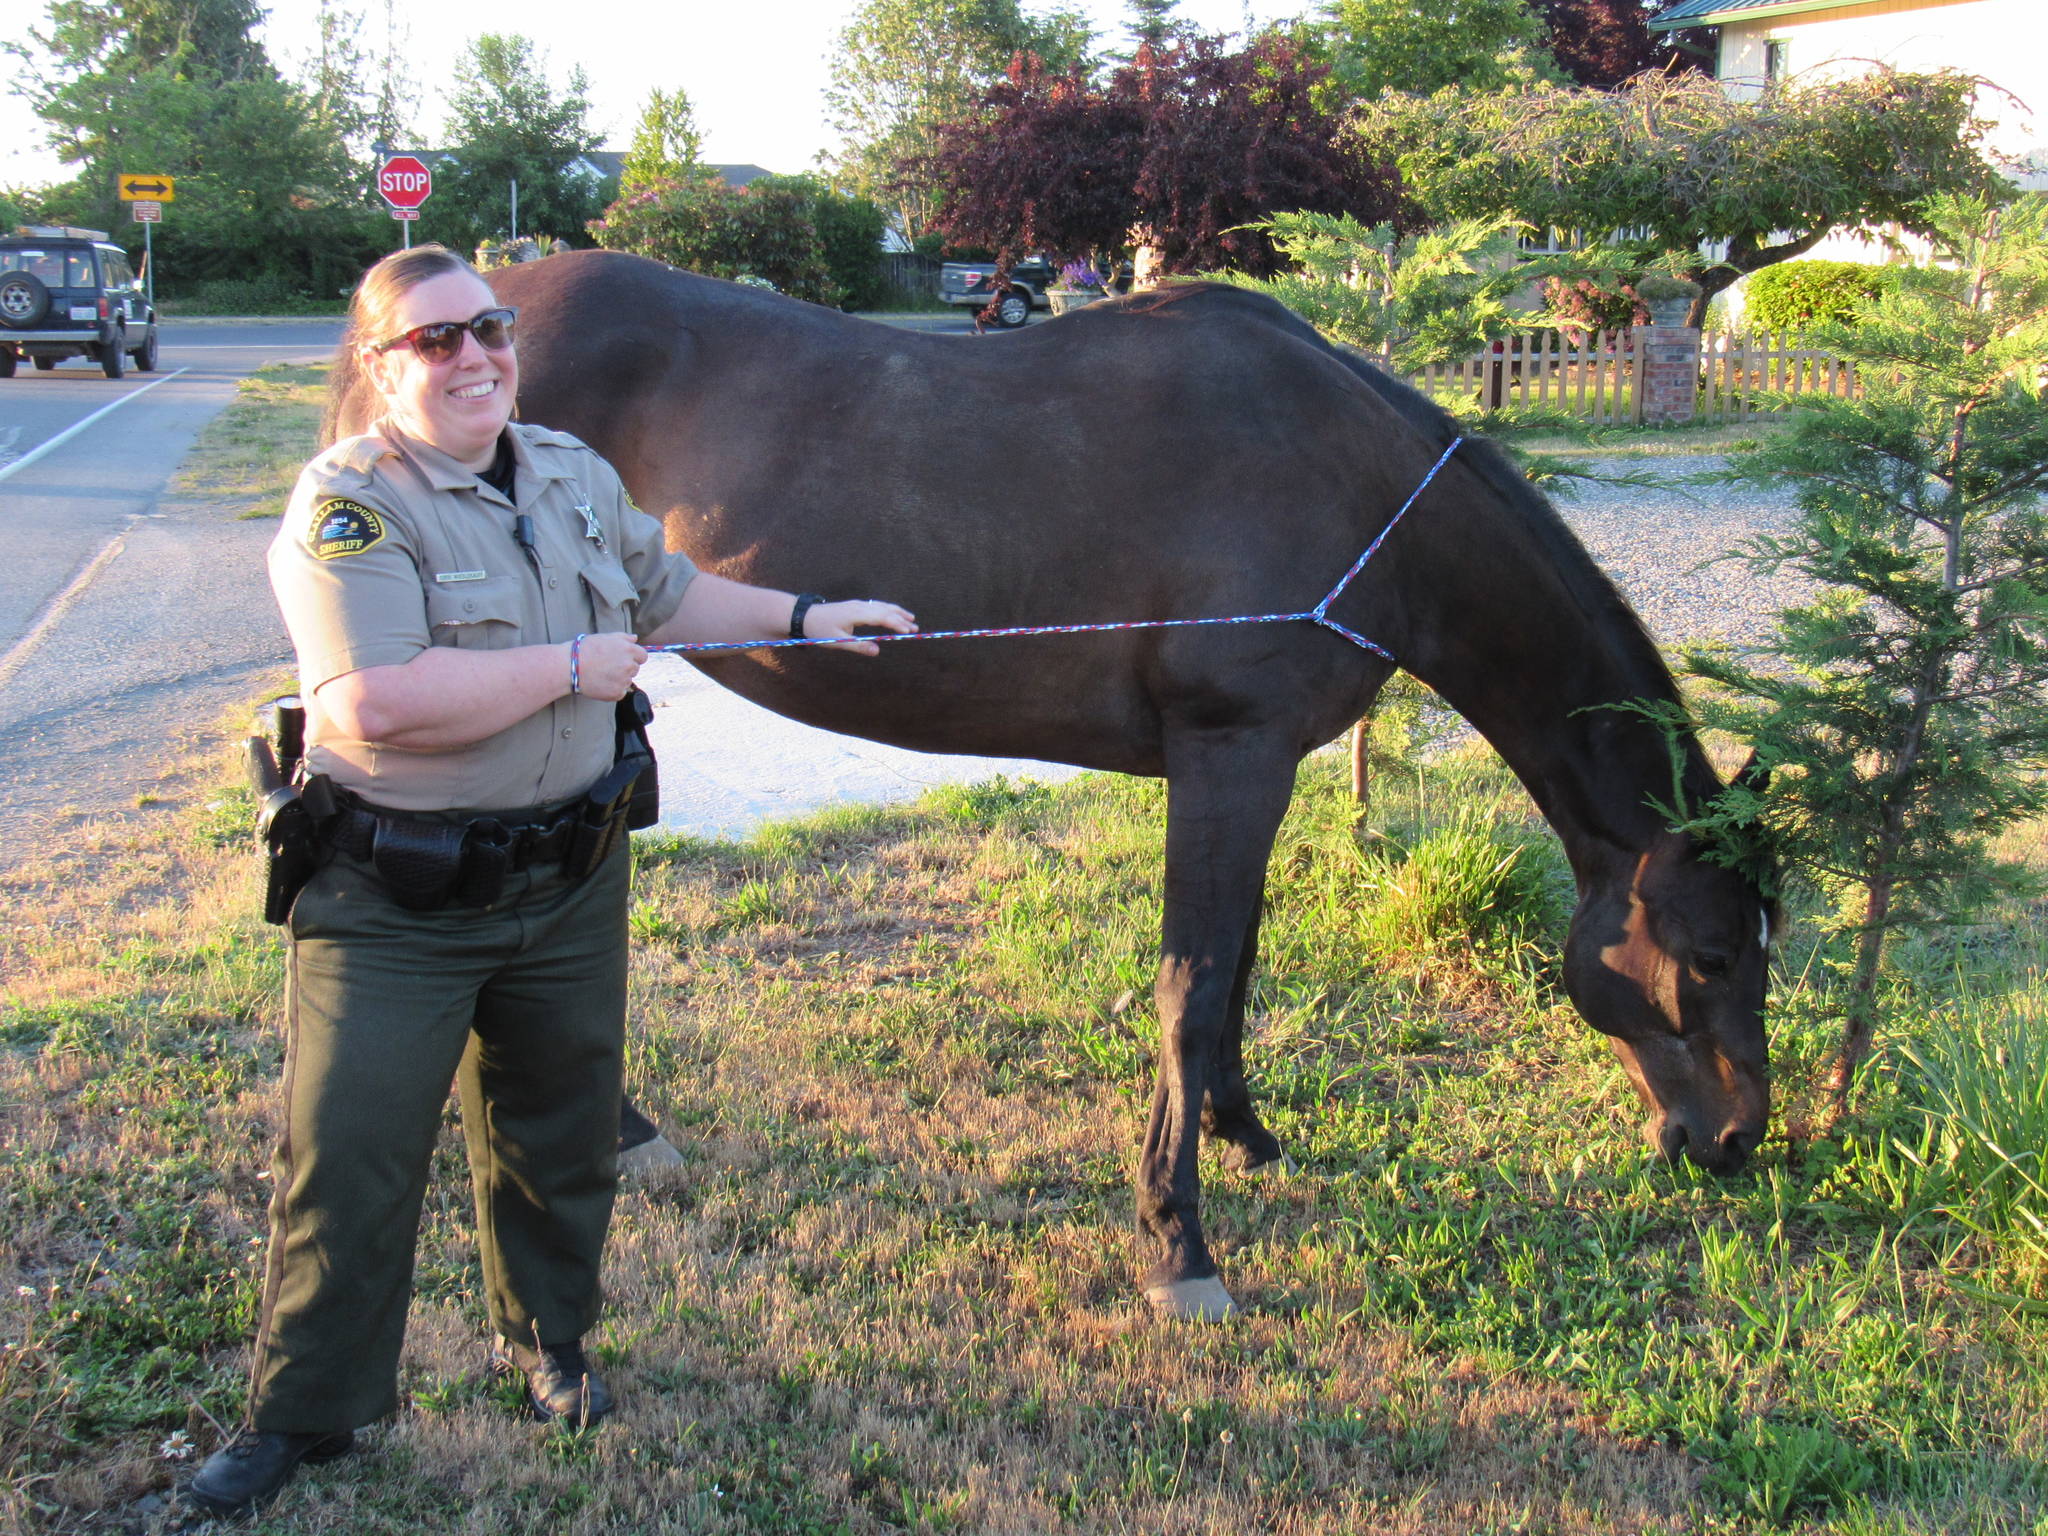 Clallam County Sheriff’s deputy Torri Middlekauff helps keep a horse in place with a dog leash on June 21 along North Priest Road. The horse got out of its home and Middlekauff happened to be driving by to stop it. With help from Jessica Conner, a 9-1-1 communications officer, and neighbors Don and Kathie Lundine. Photo courtesy of Don Lundine